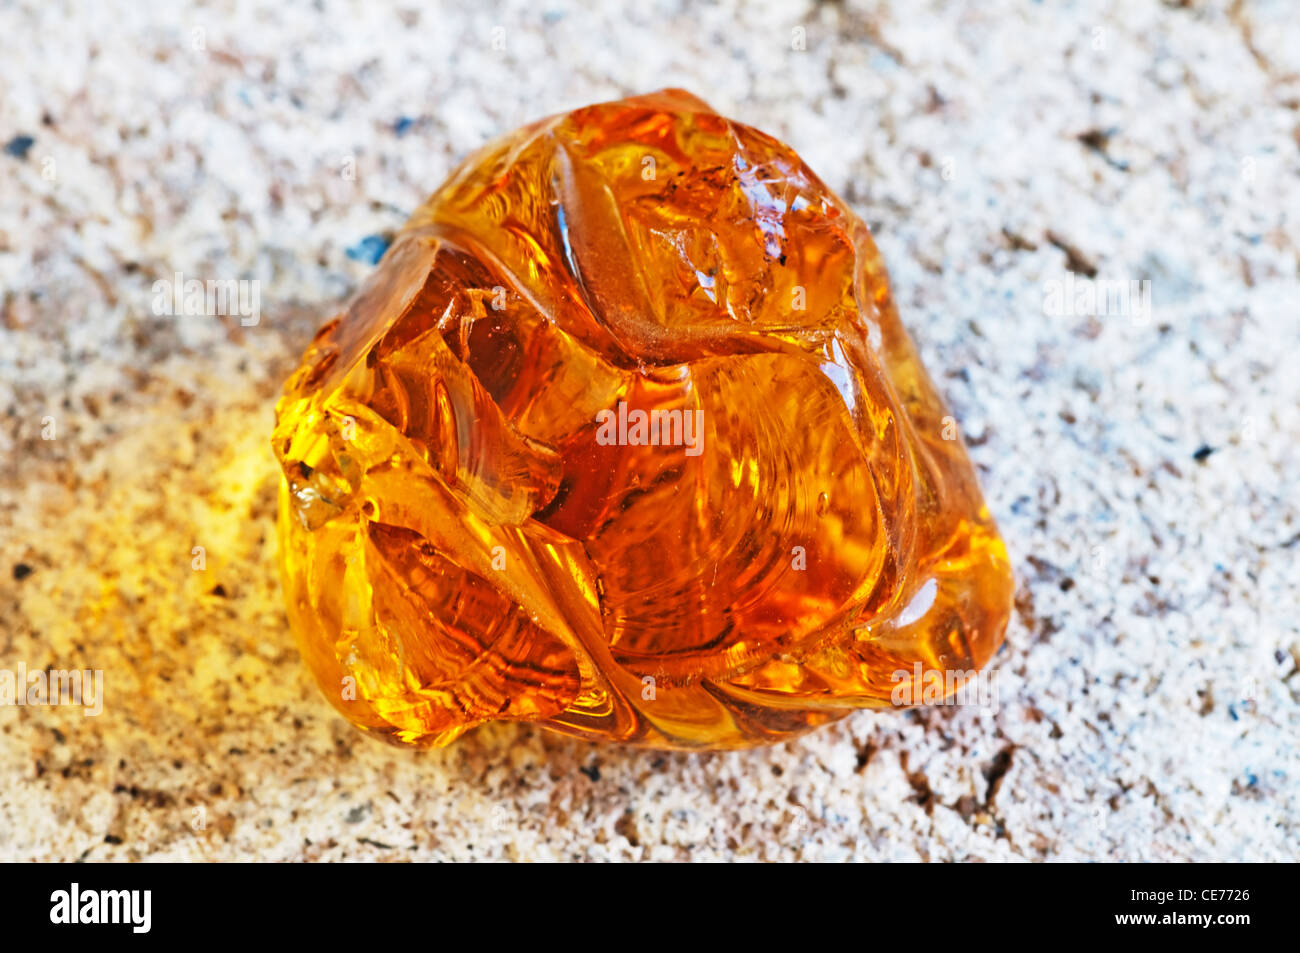 Amber Stone High Resolution Stock Photography and Images - Alamy